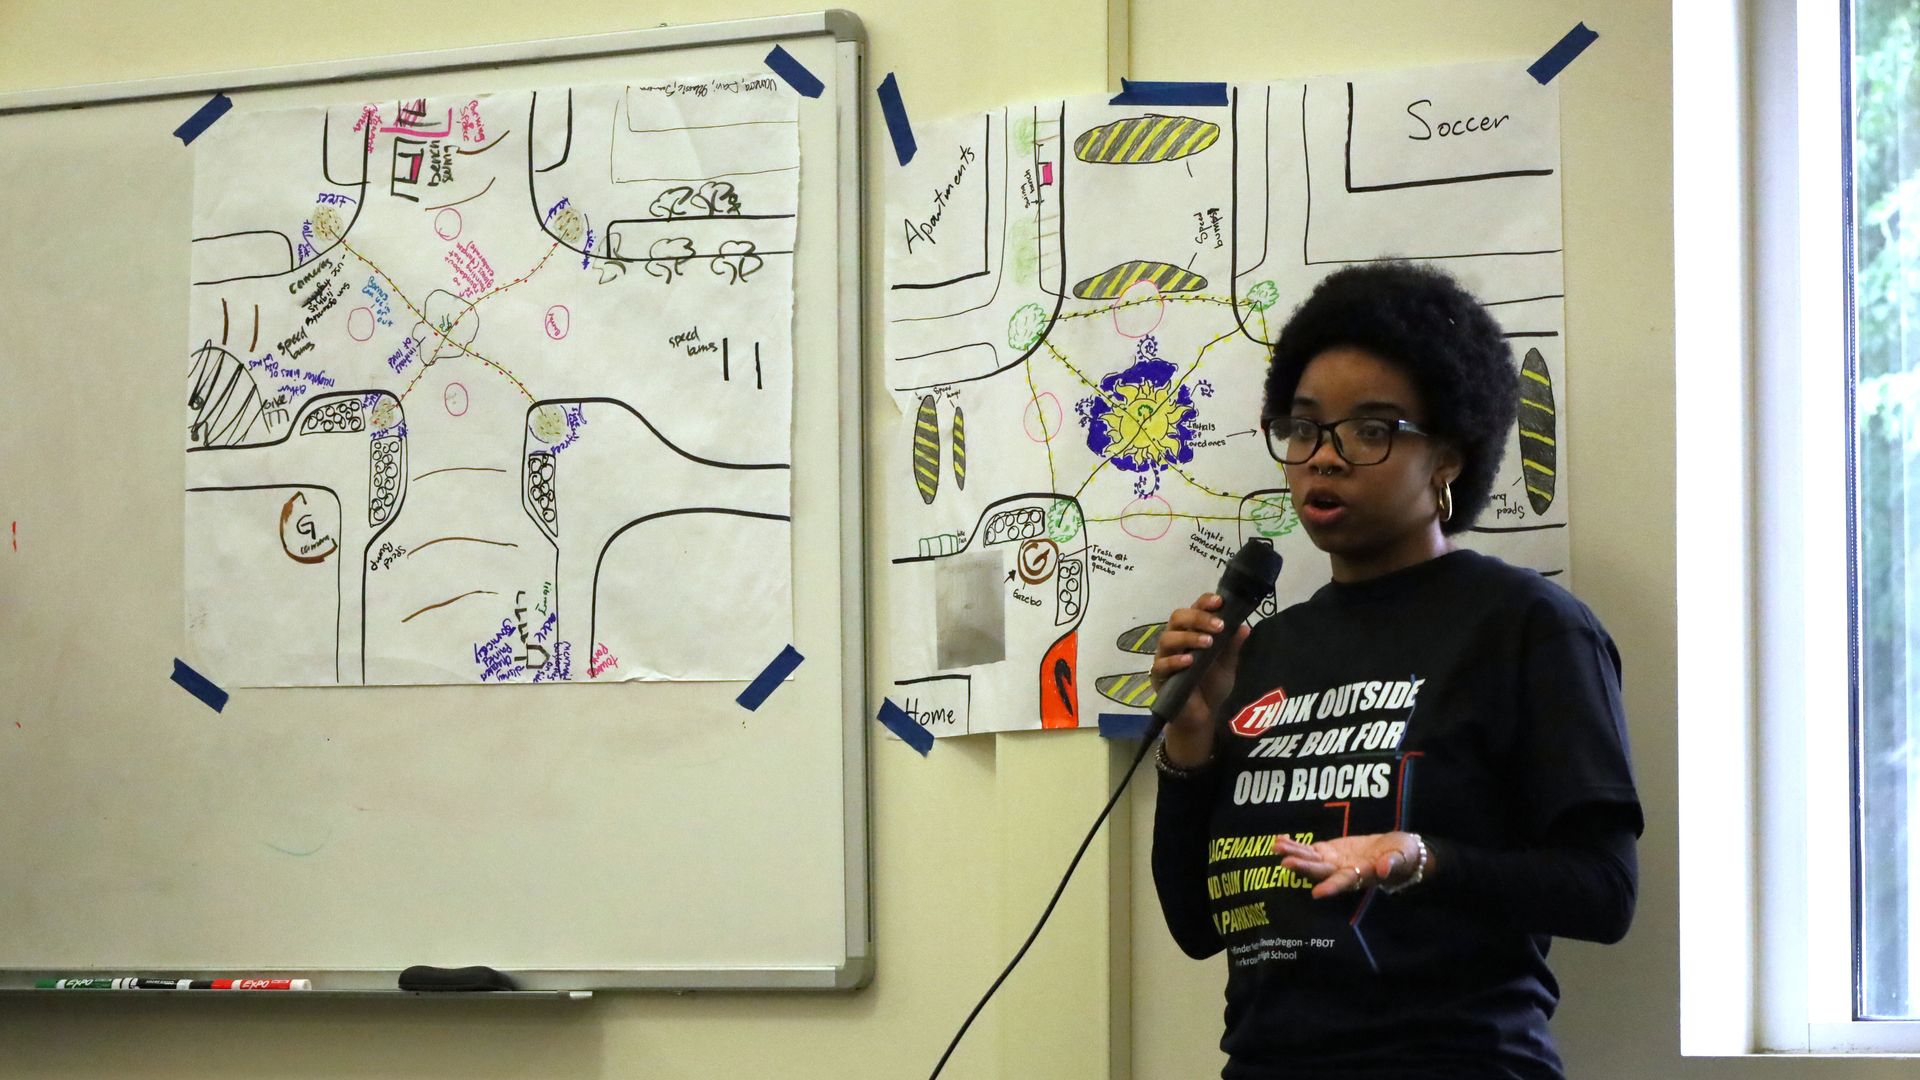 A young woman speaking into a microphone, standing in front of two pieces of paper with drawings of an intersection on them taped to the wall.